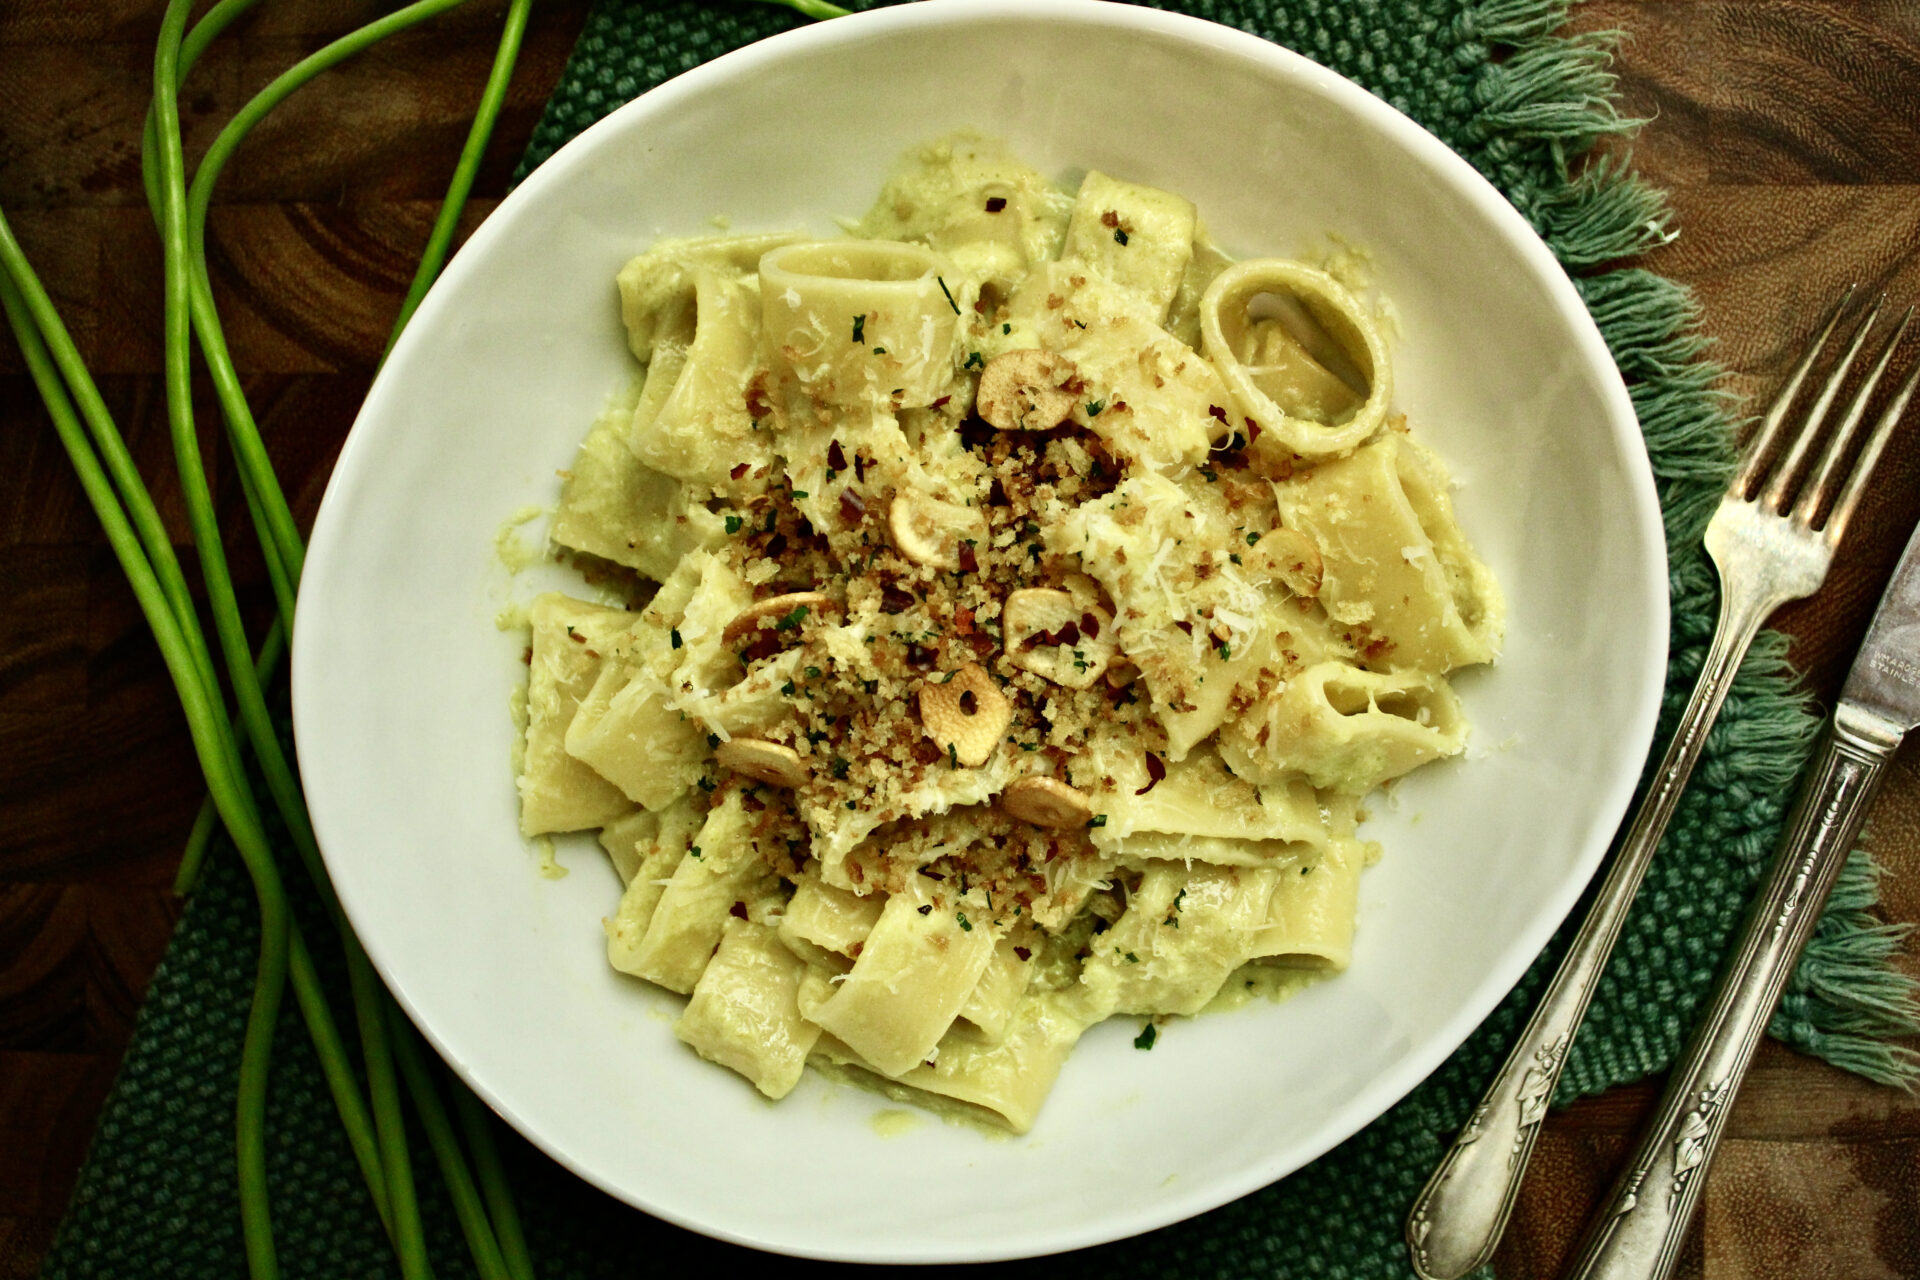 This Garlic Scape Pasta is creamy, mildly garlicky, and so delicious. If you can find garlic scapes at the farmers market, you must try garlic scape pasta!